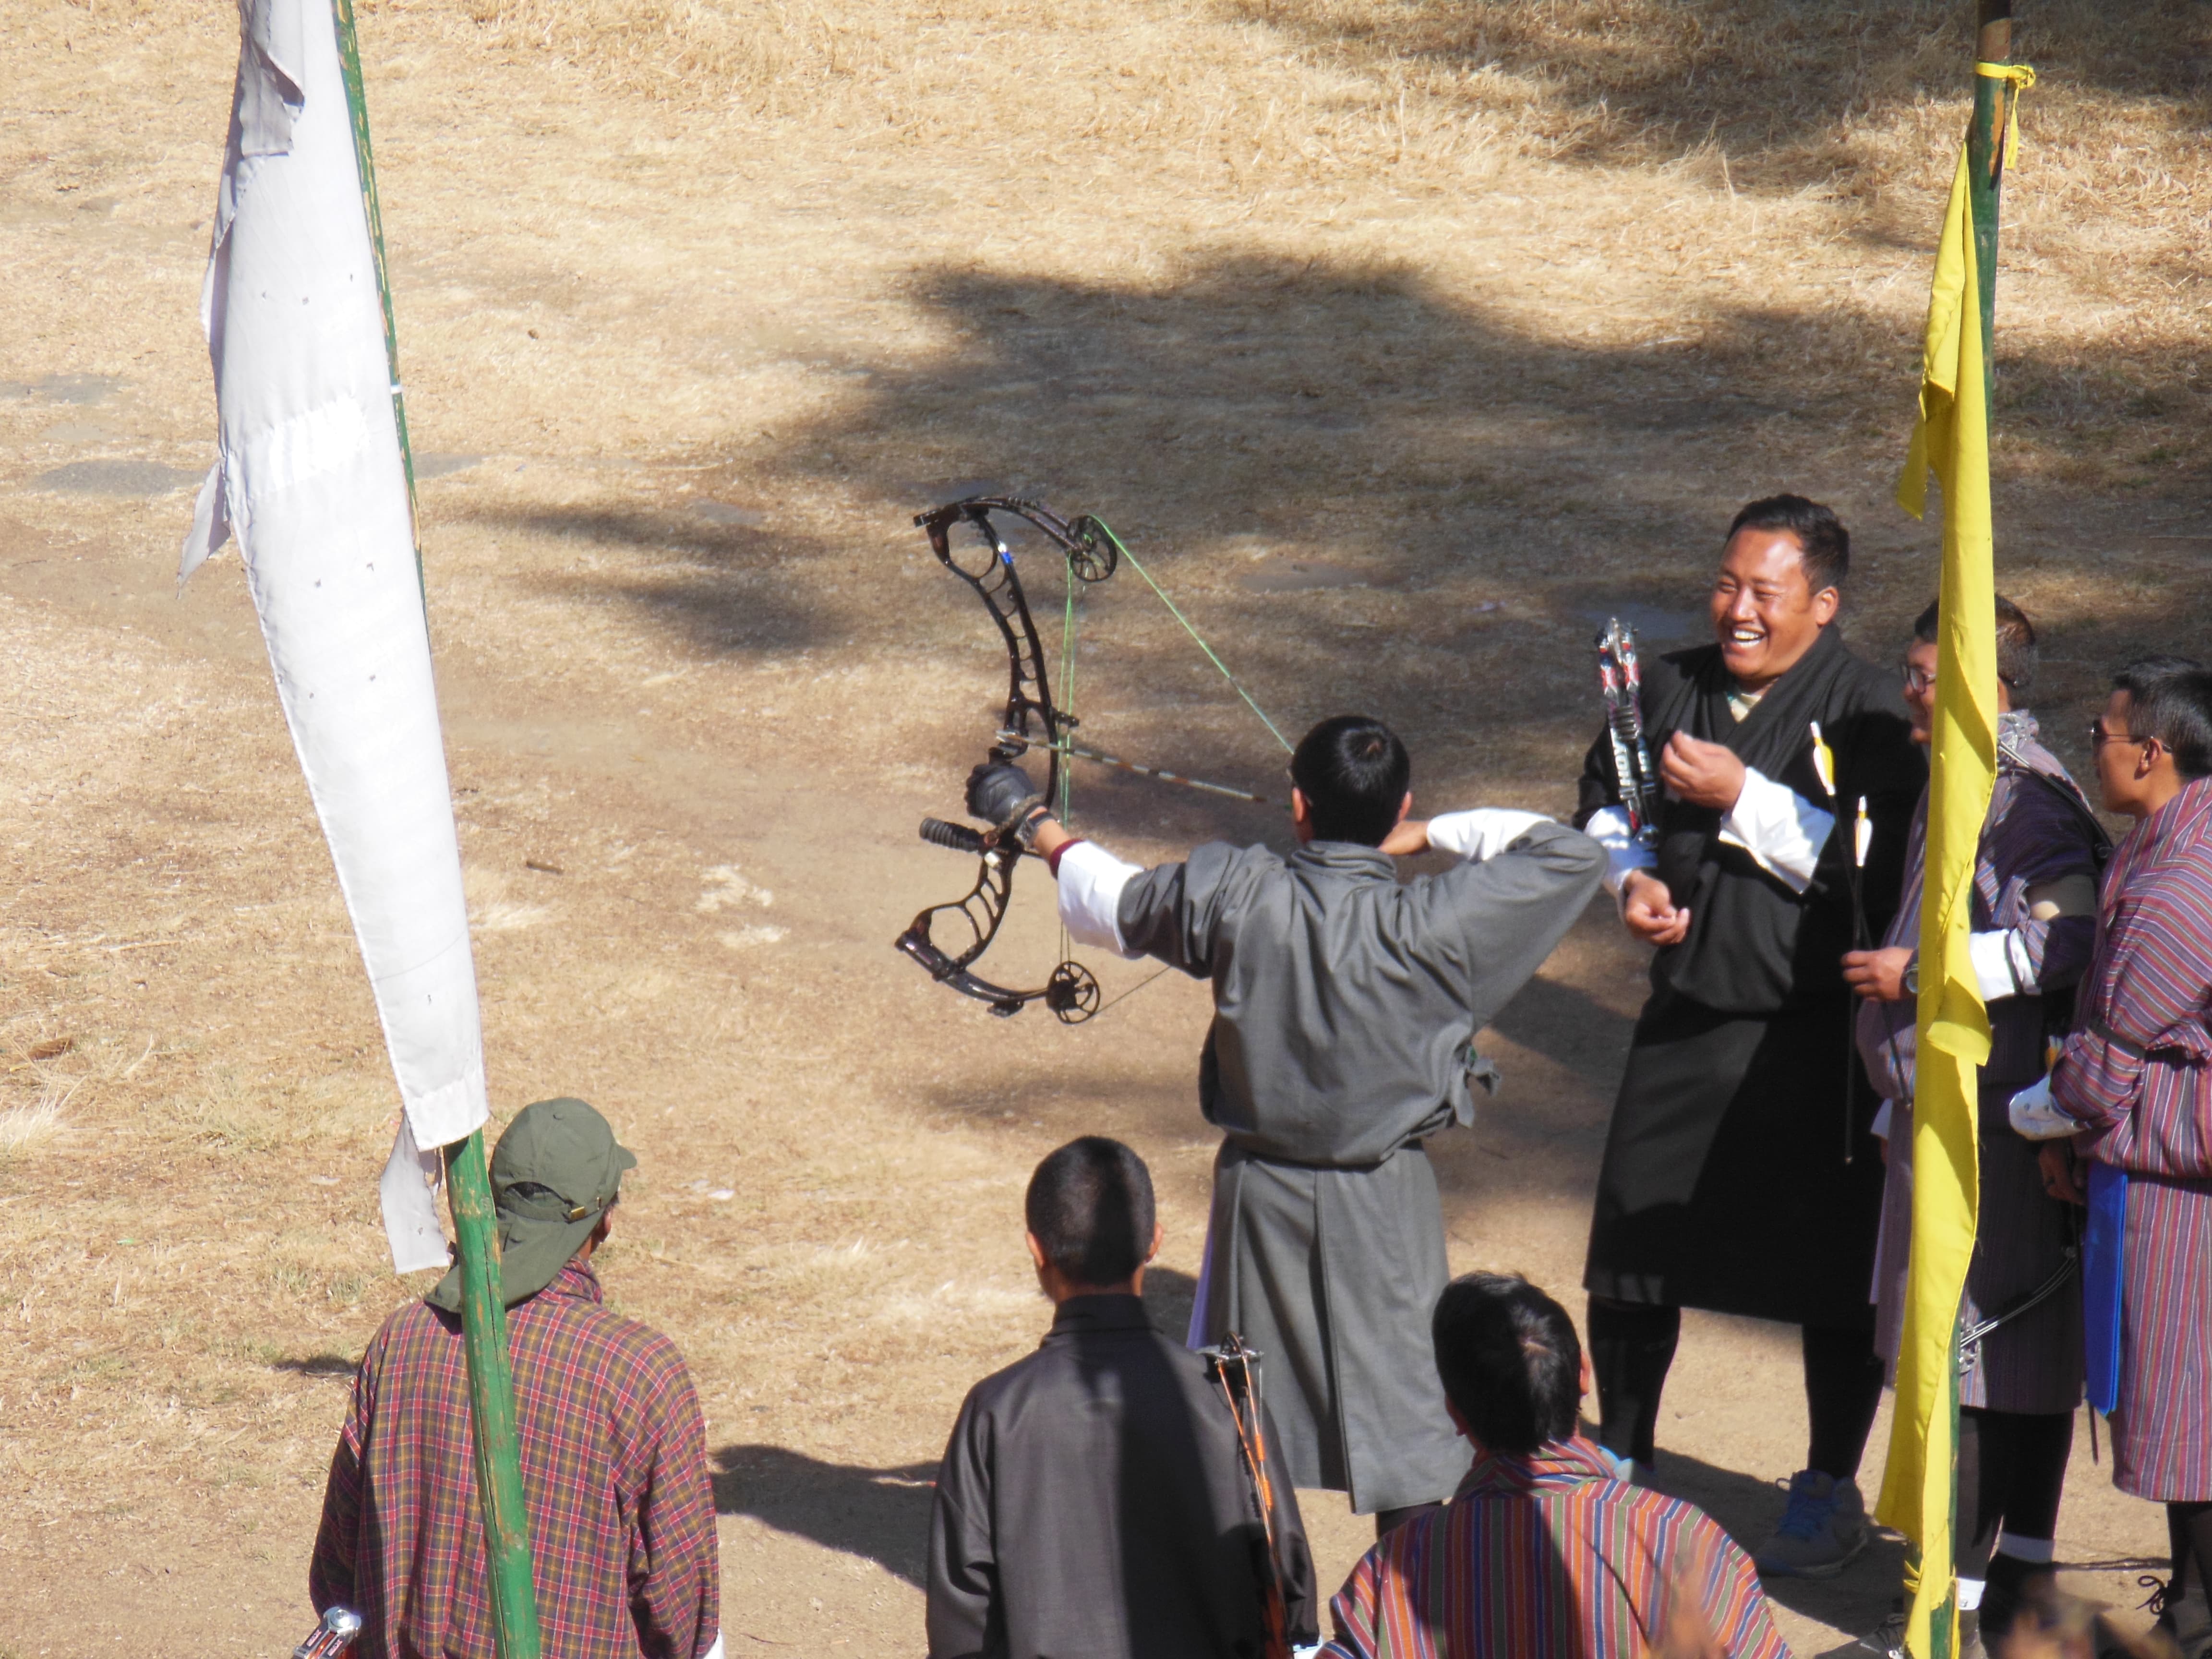 Everyone between young adults and the elderly can be sighted mingling at the Changlimithang Archery Ground in Thimphu, where regular matches and practice sessions take place. especially on weekends. Traditional as well as modern archery is a thriving interest in Bhutan.